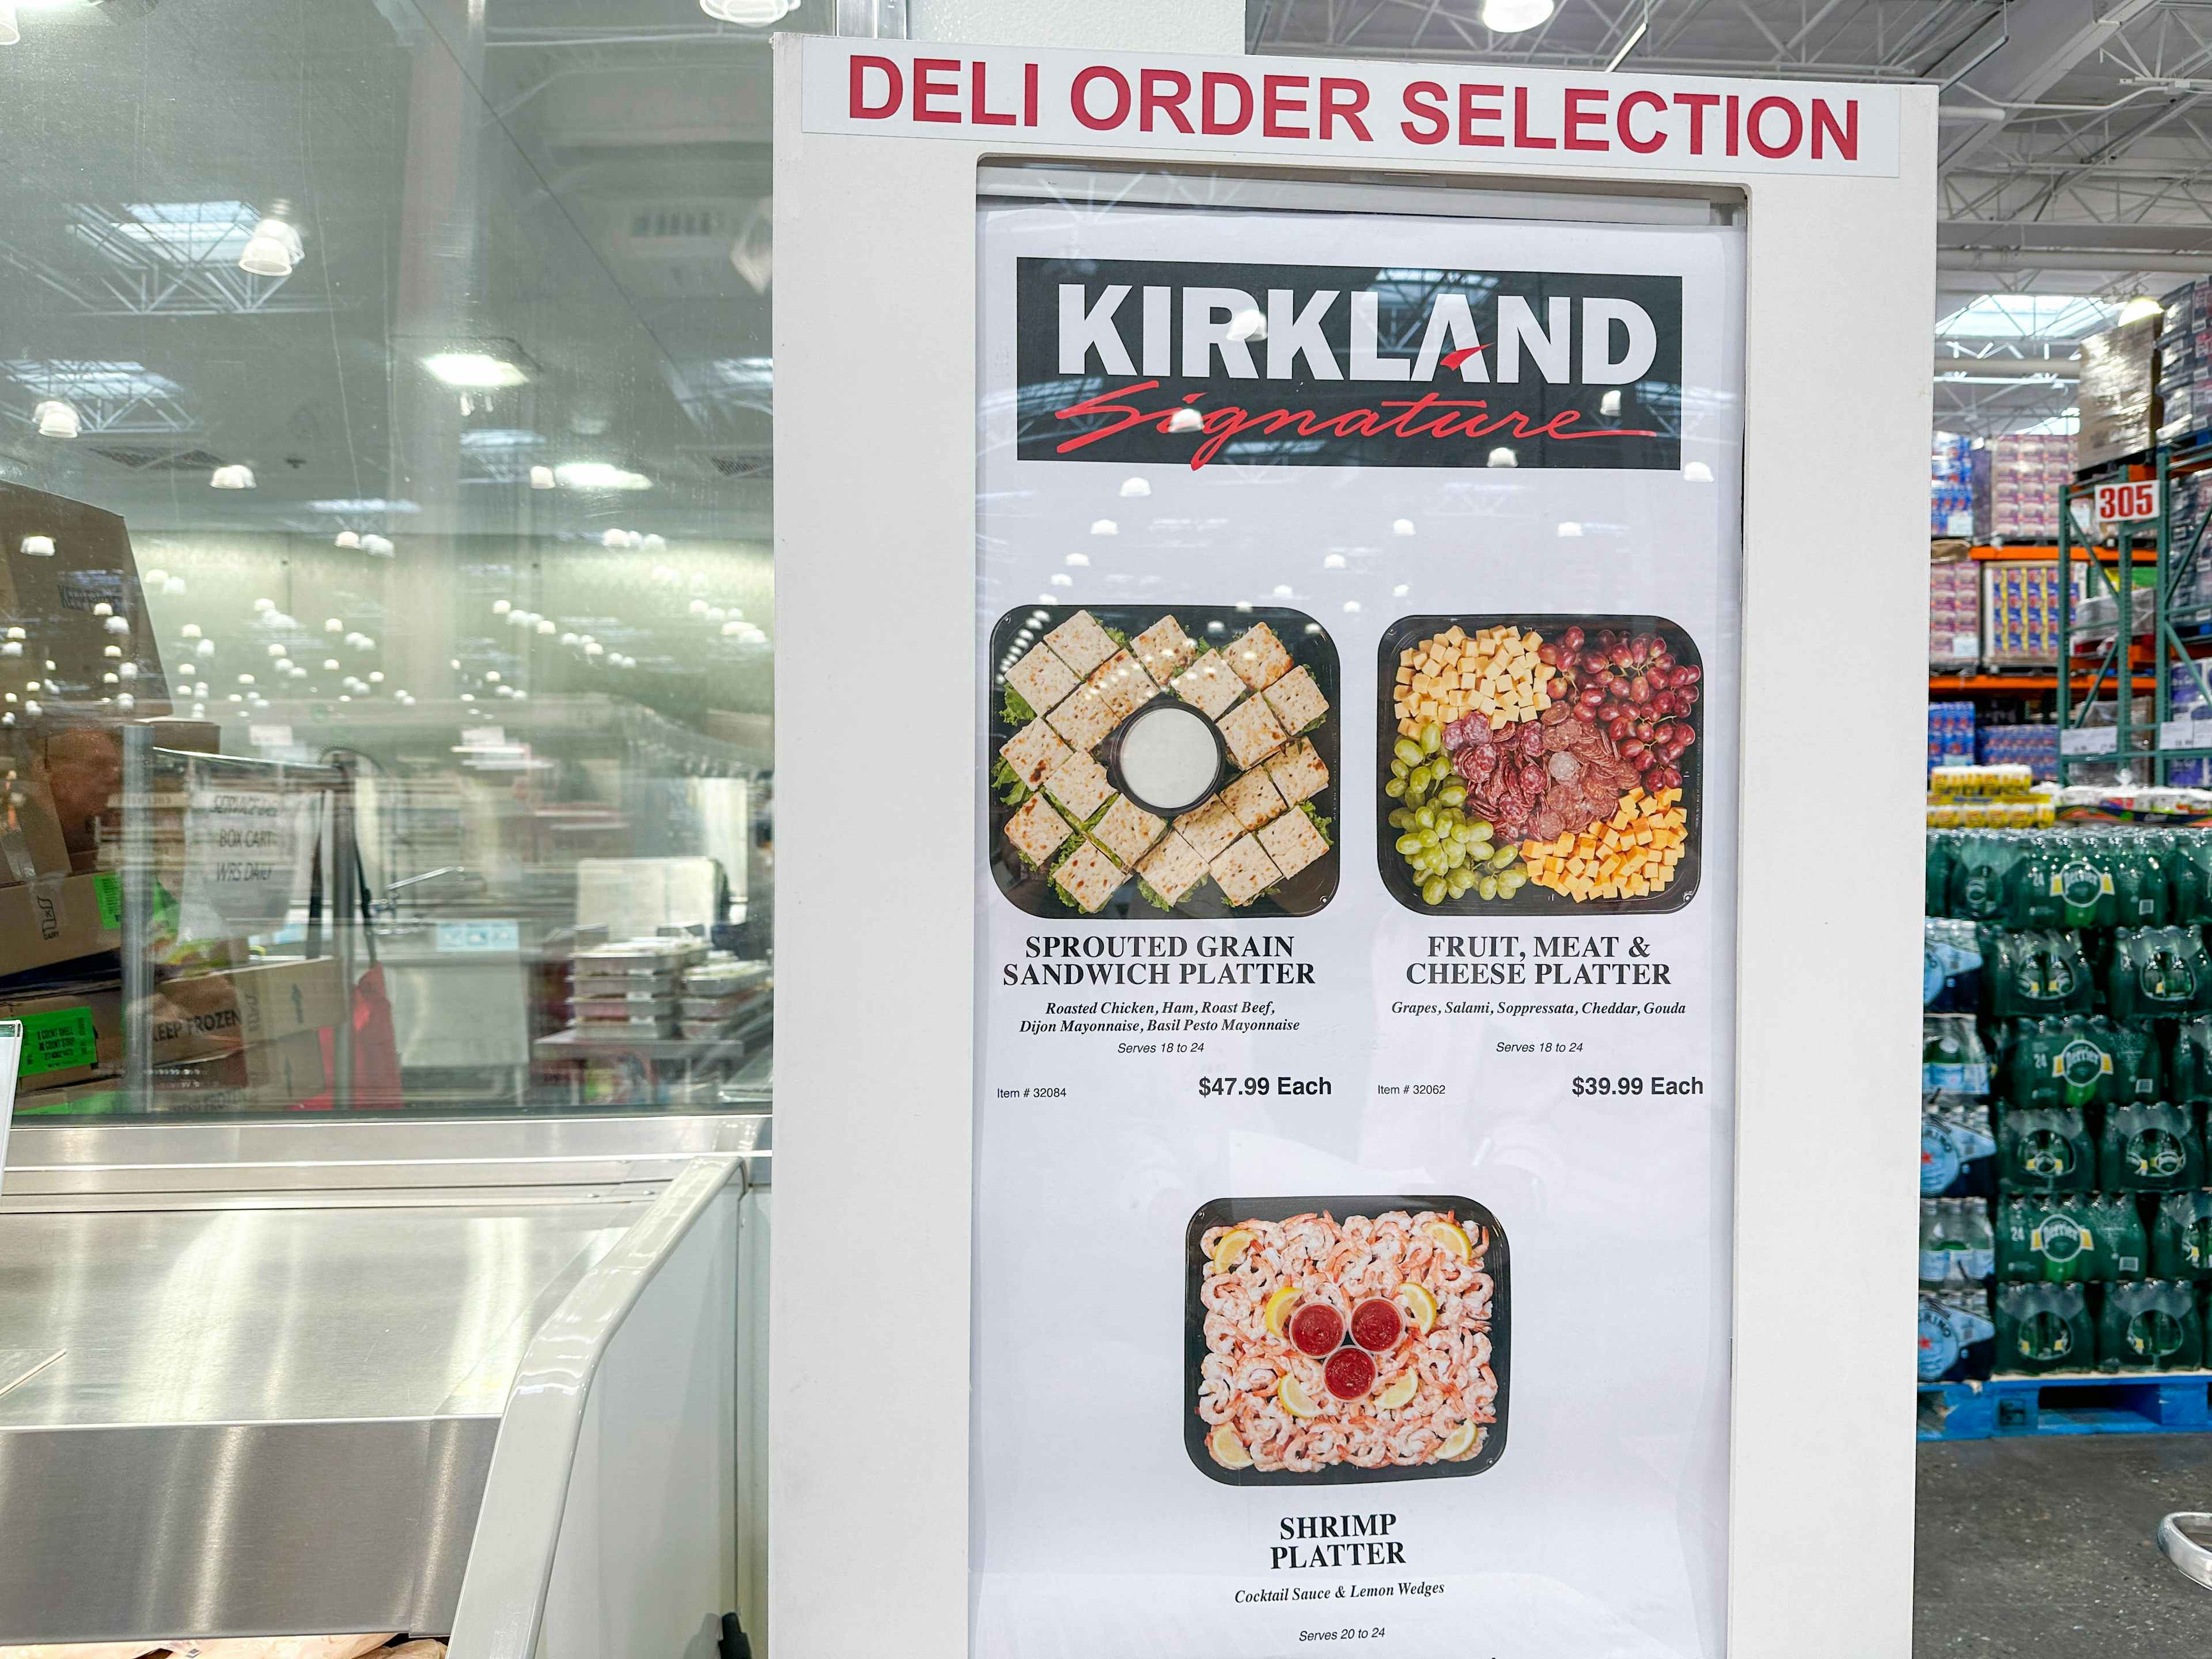 costco-catering-party-platter-fruit-meat-cheese-kcl-model-12